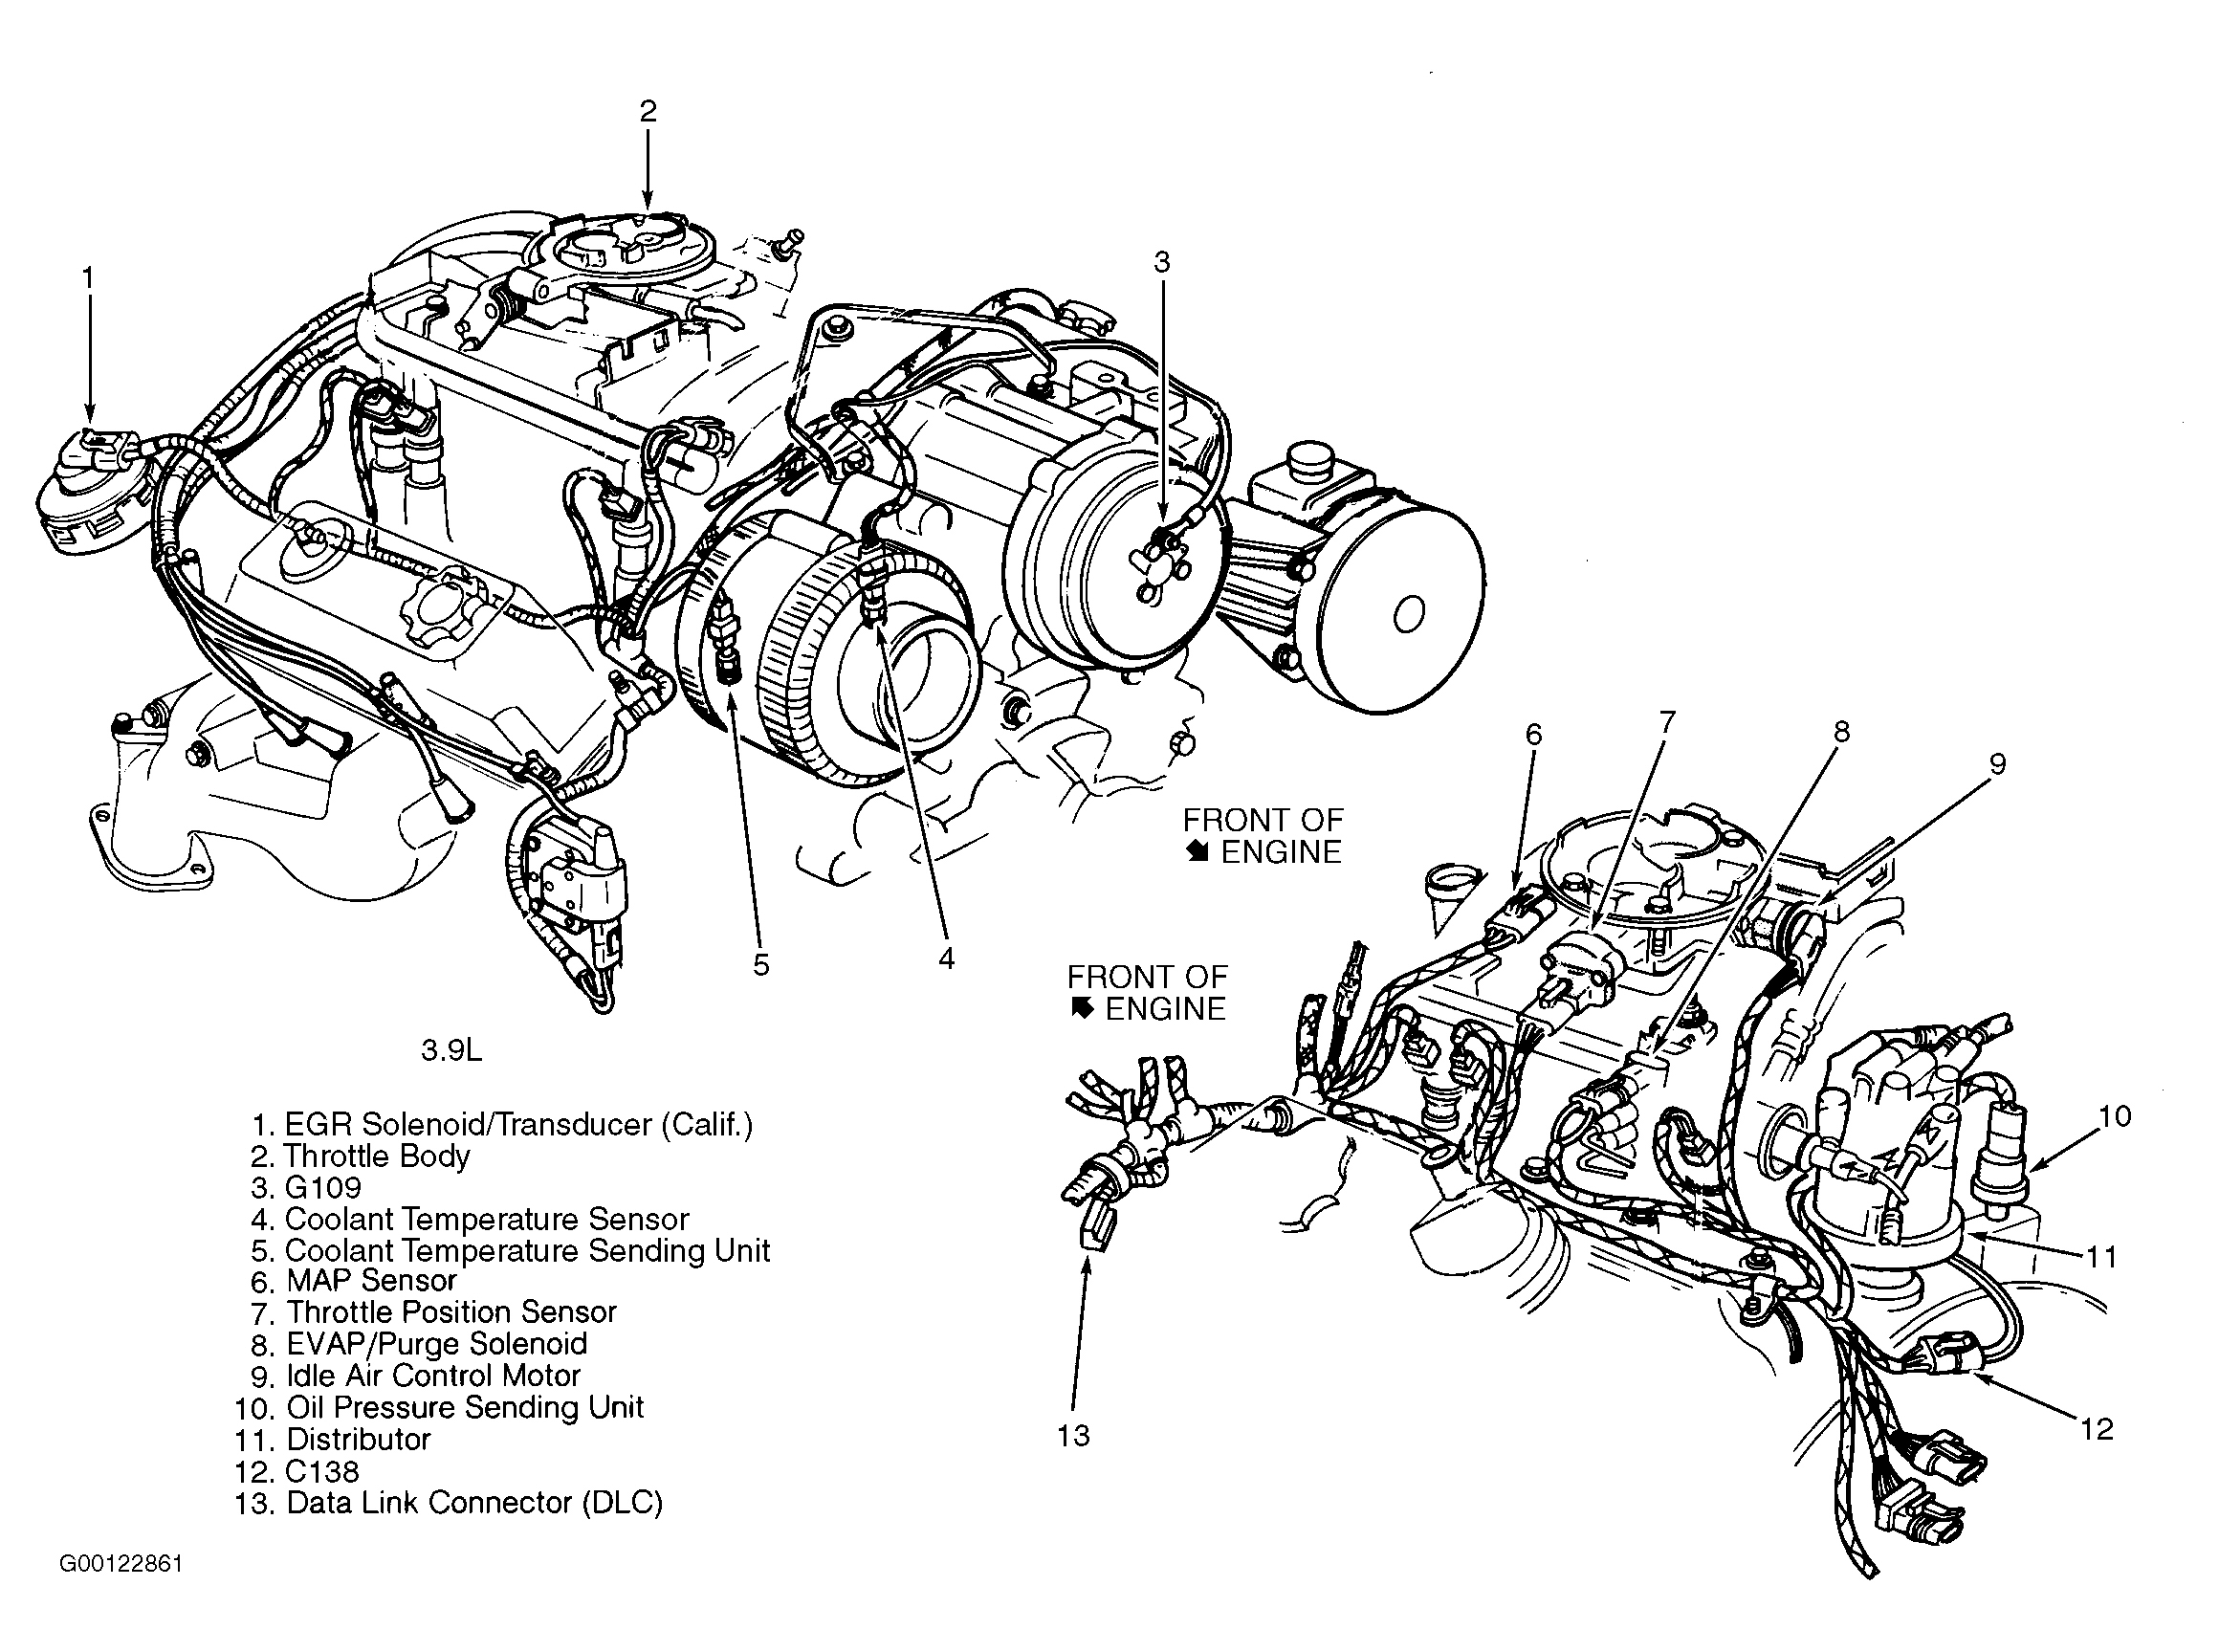 Dodge Ram Wagon B3500 1995 - Component Locations -  Right Front Of Engine, Left Side Of Engine